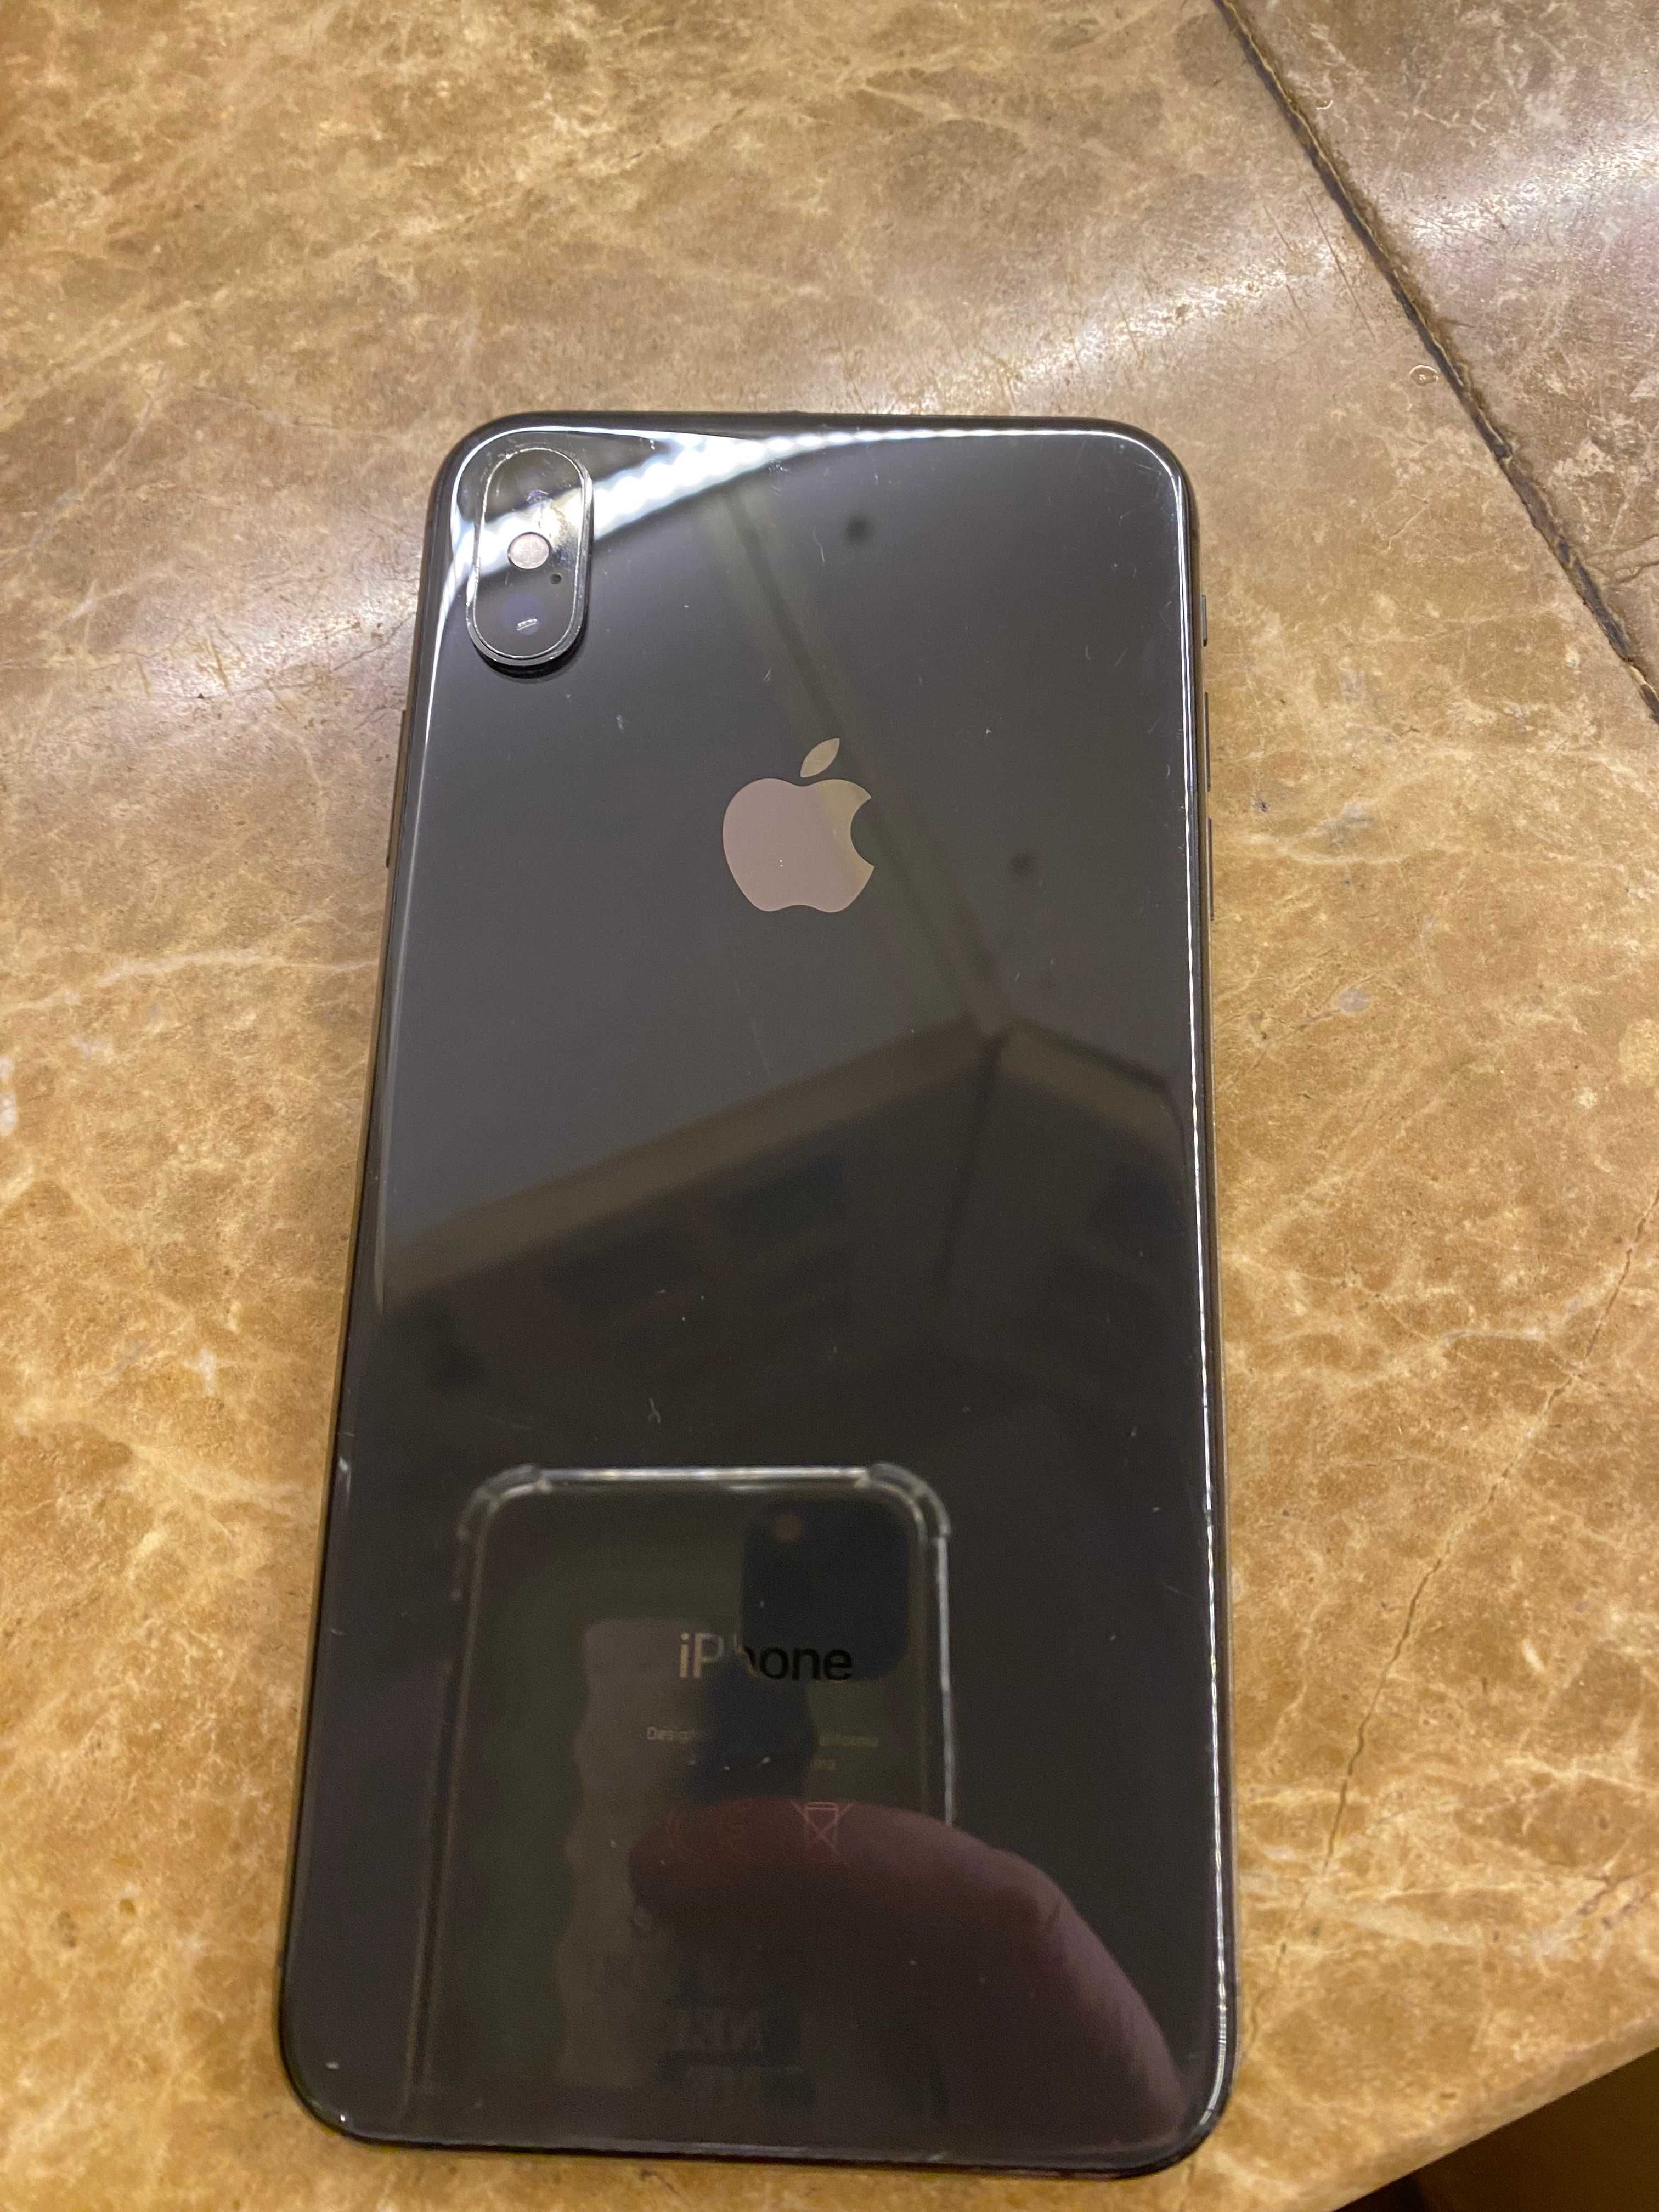 Apple iPhone XS Max 64GB space gray